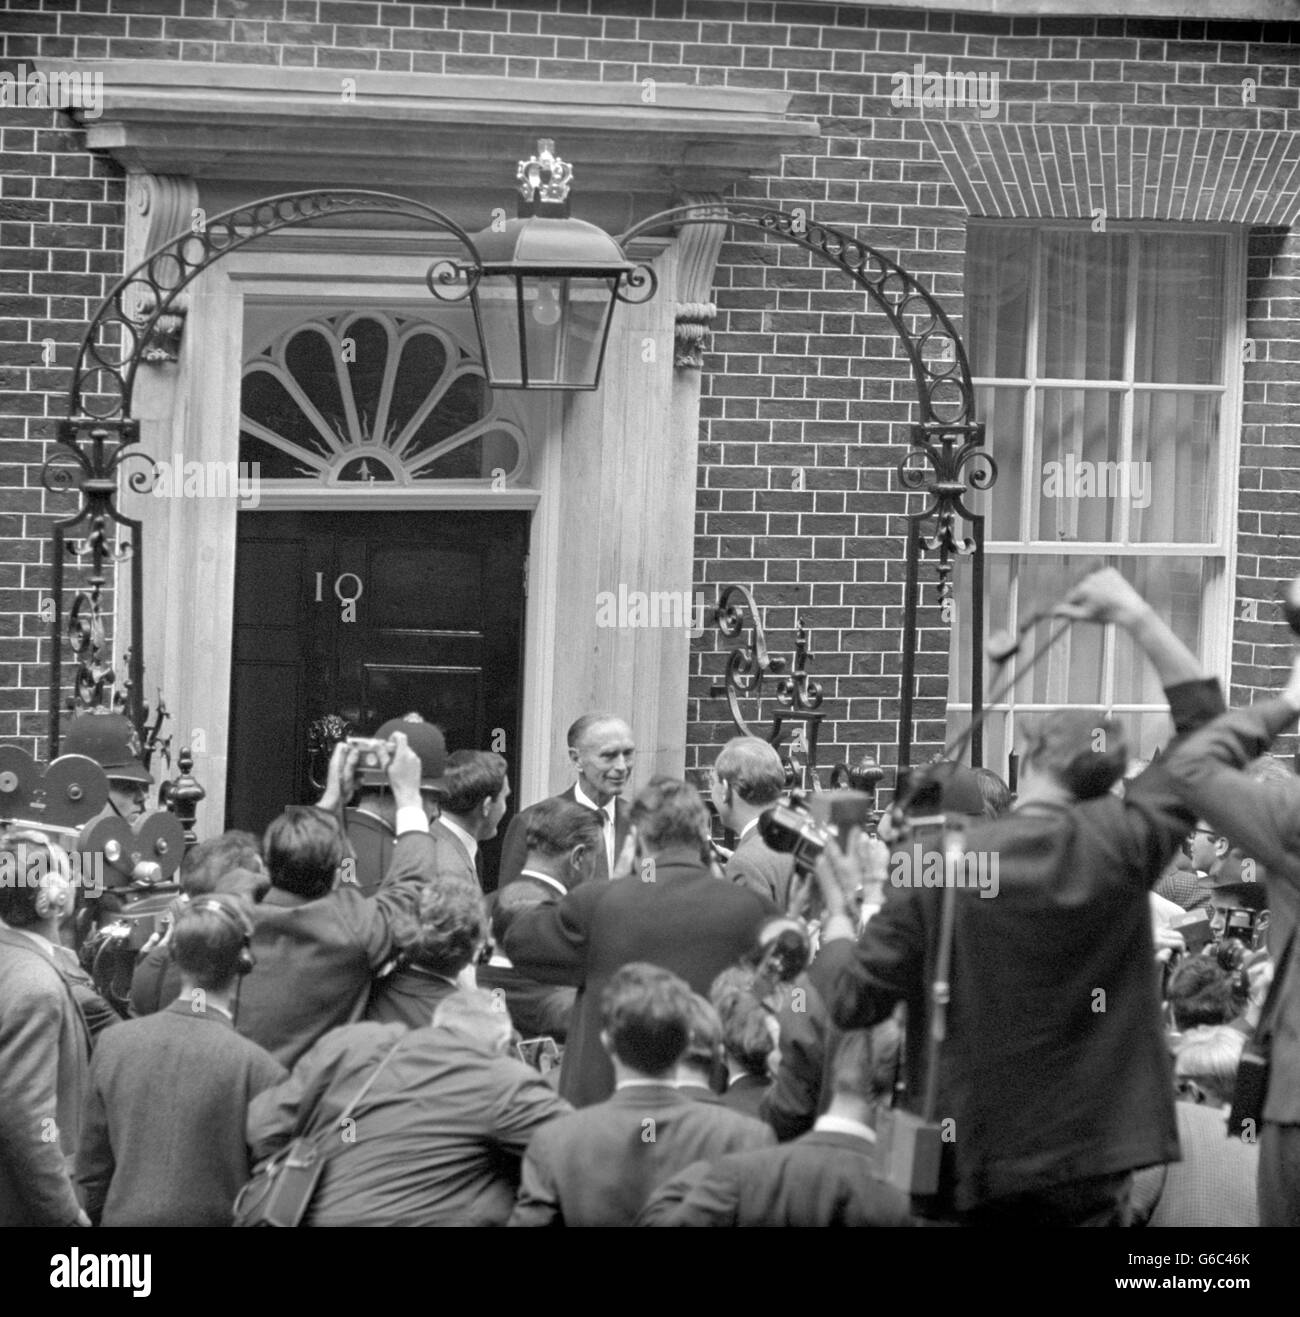 Politics - Lord Home becomes the new Prime Minister - 10 Downing Street, London Stock Photo